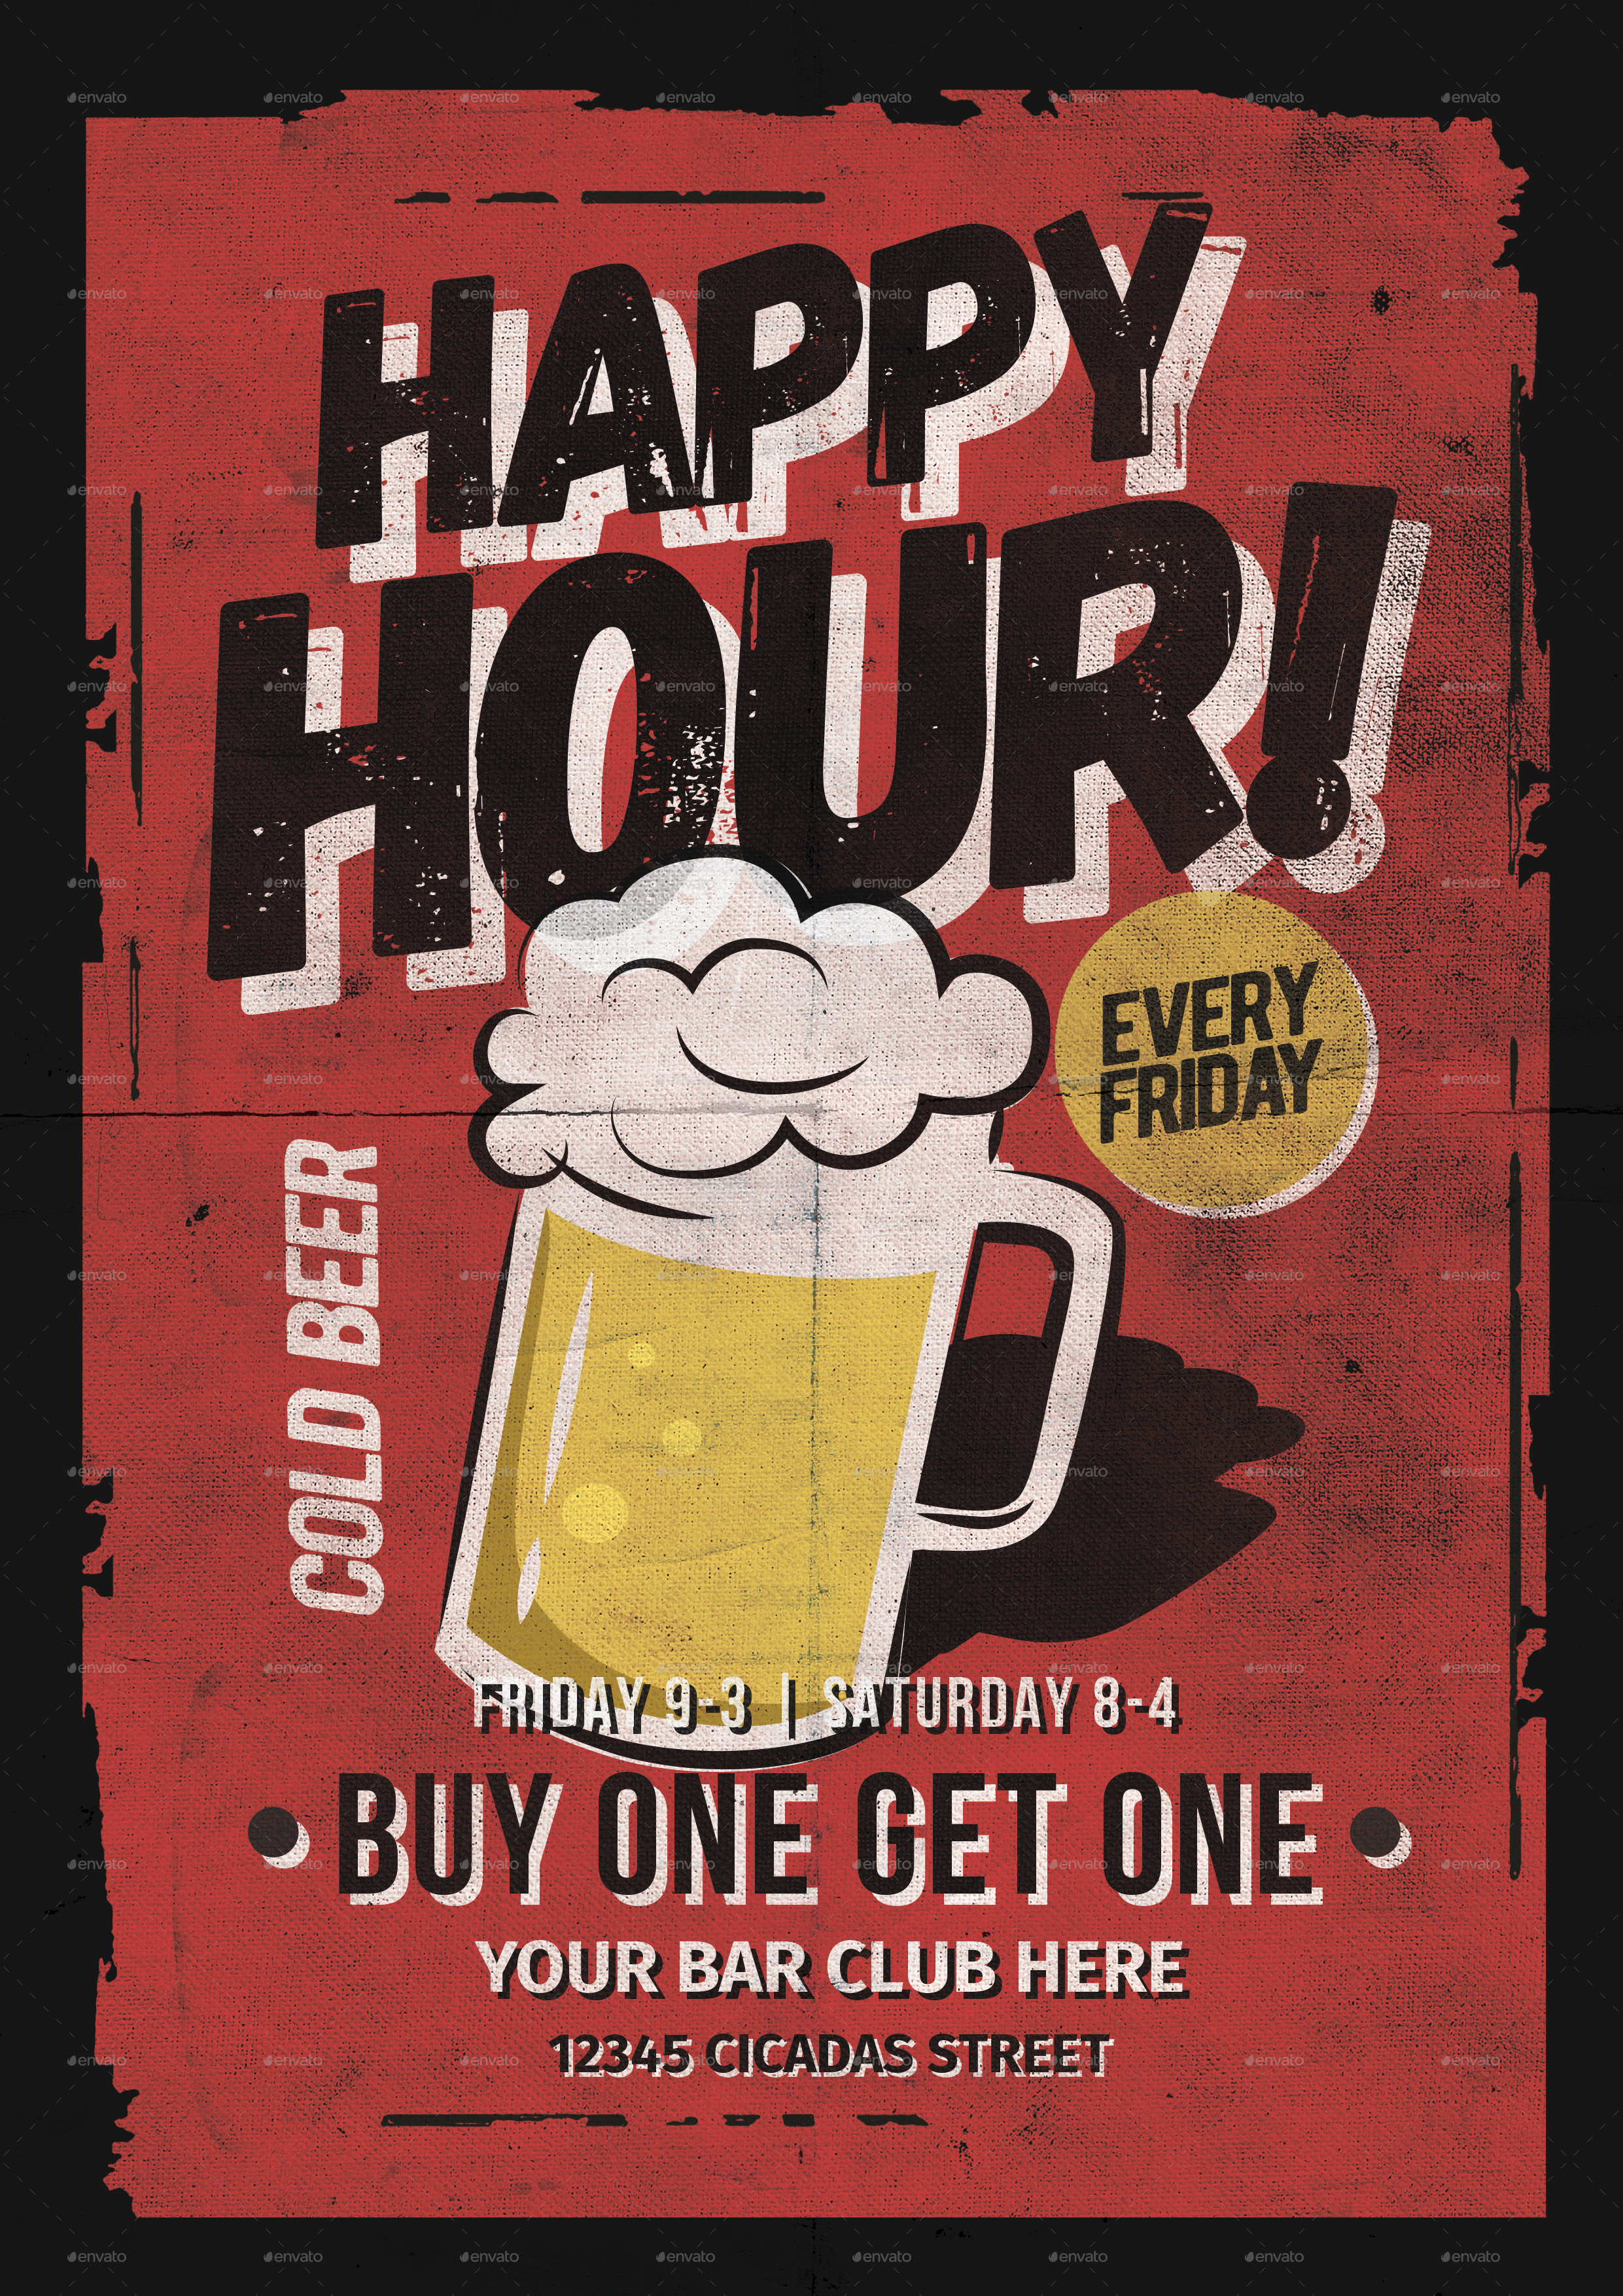 Classic Happy Hour Flyer by lilynthesweetpea | GraphicRiver2481 x 3509